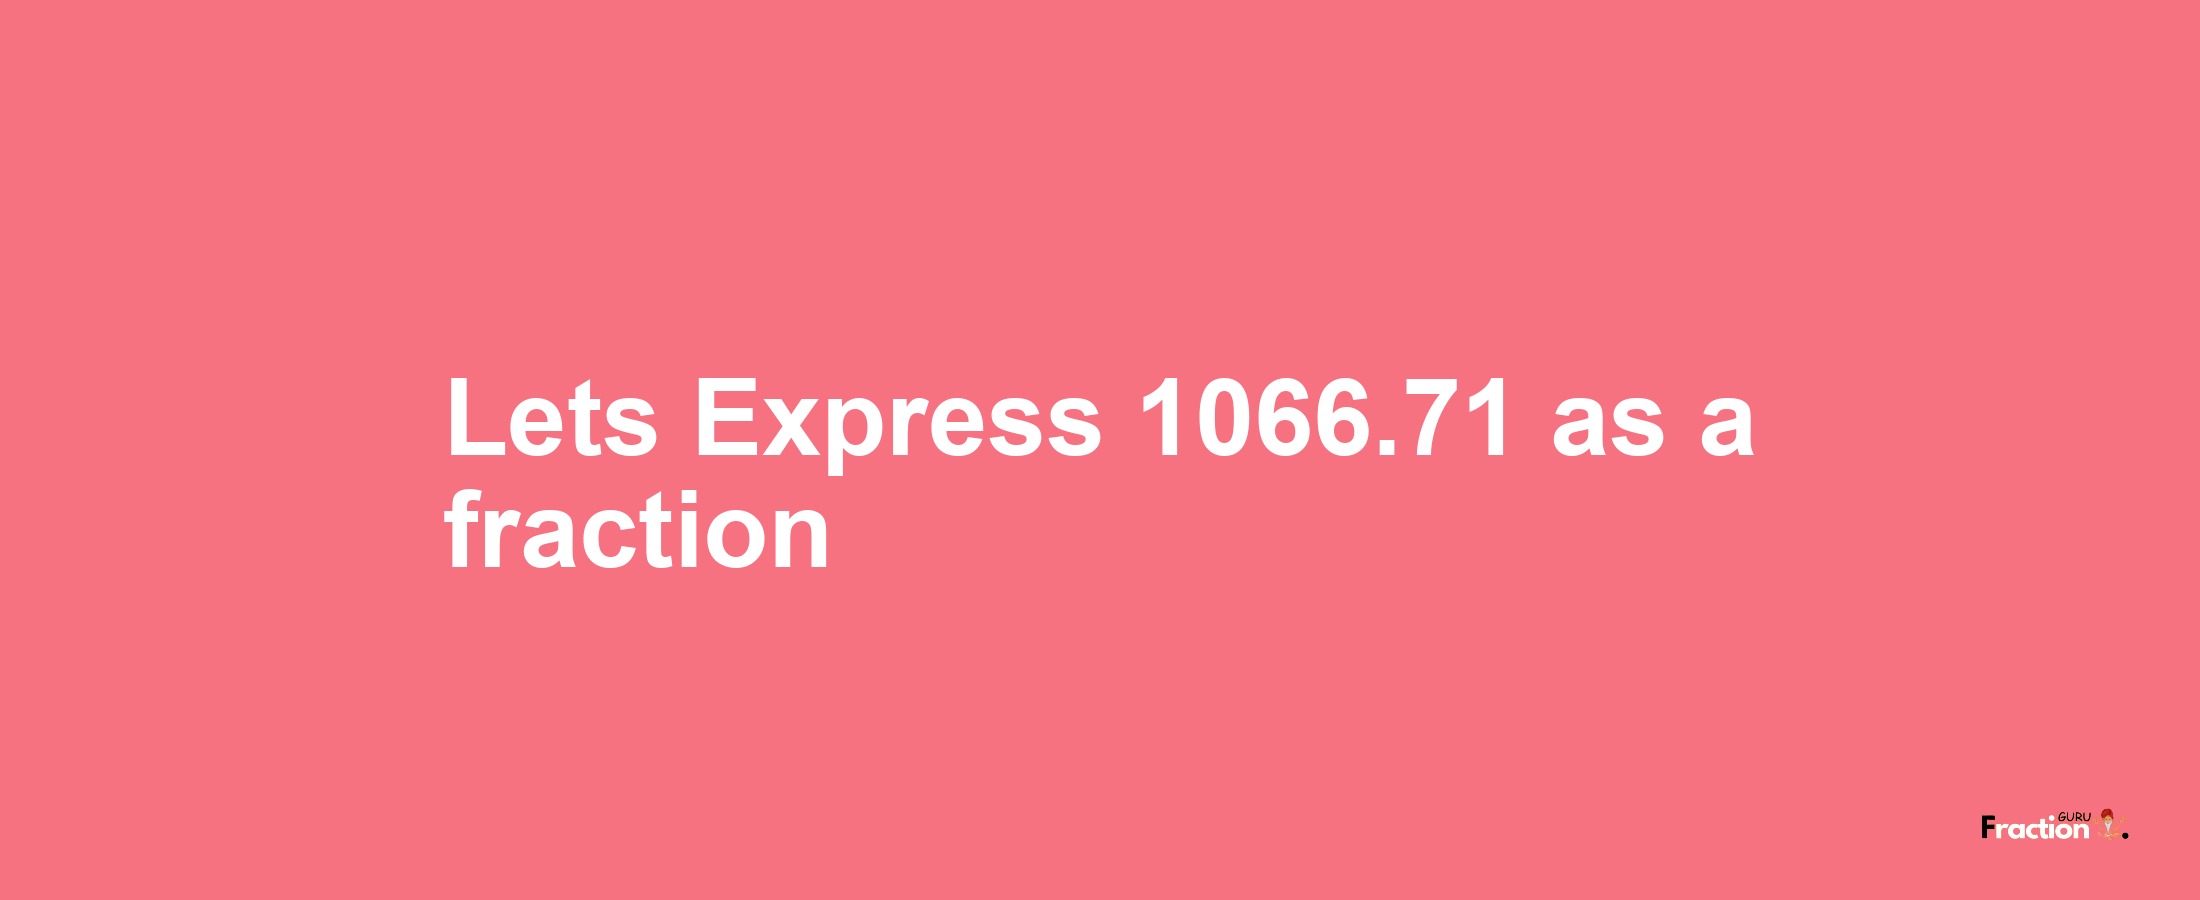 Lets Express 1066.71 as afraction